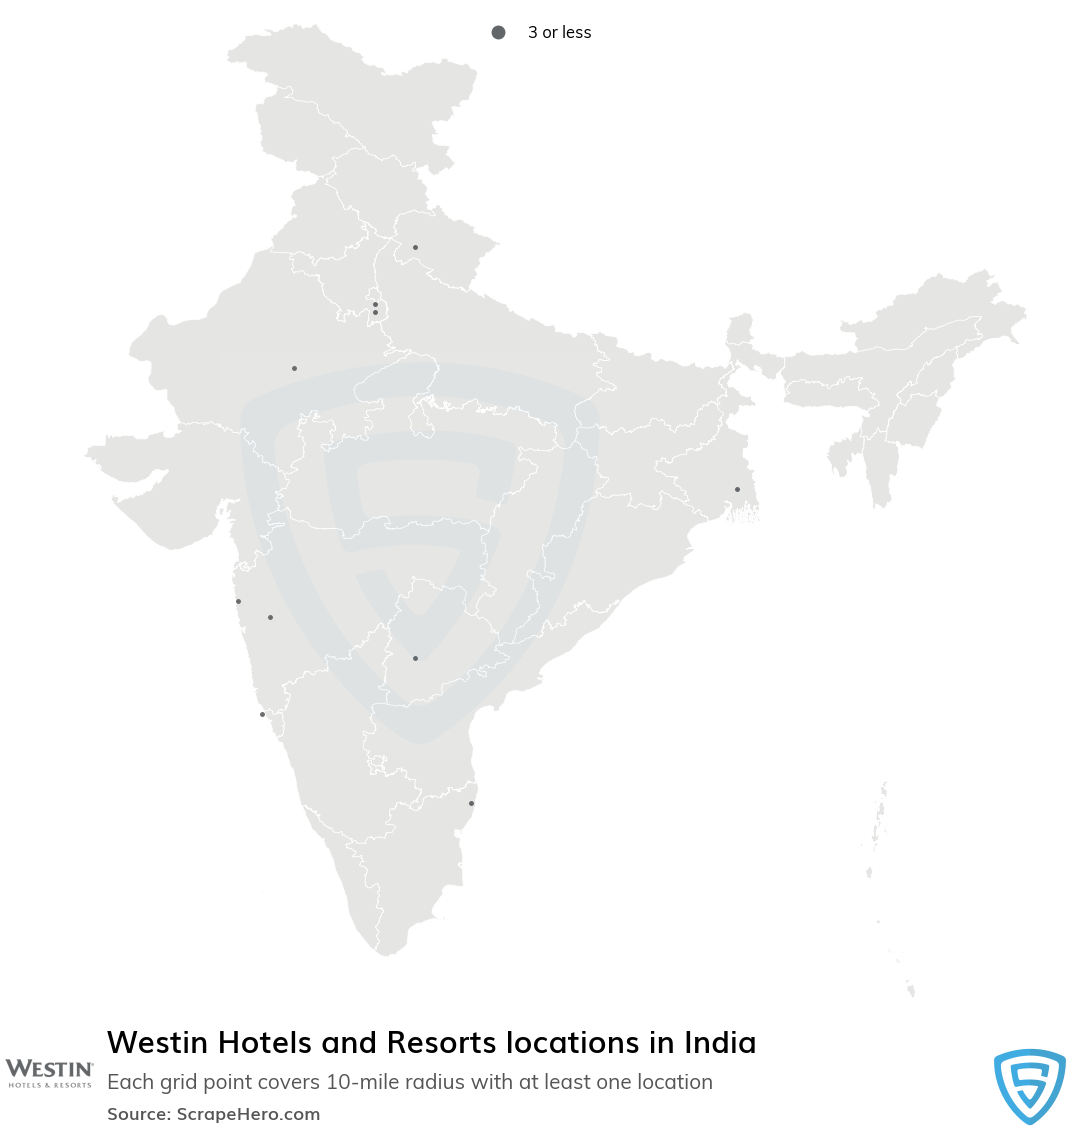 Westin Hotels and Resorts locations